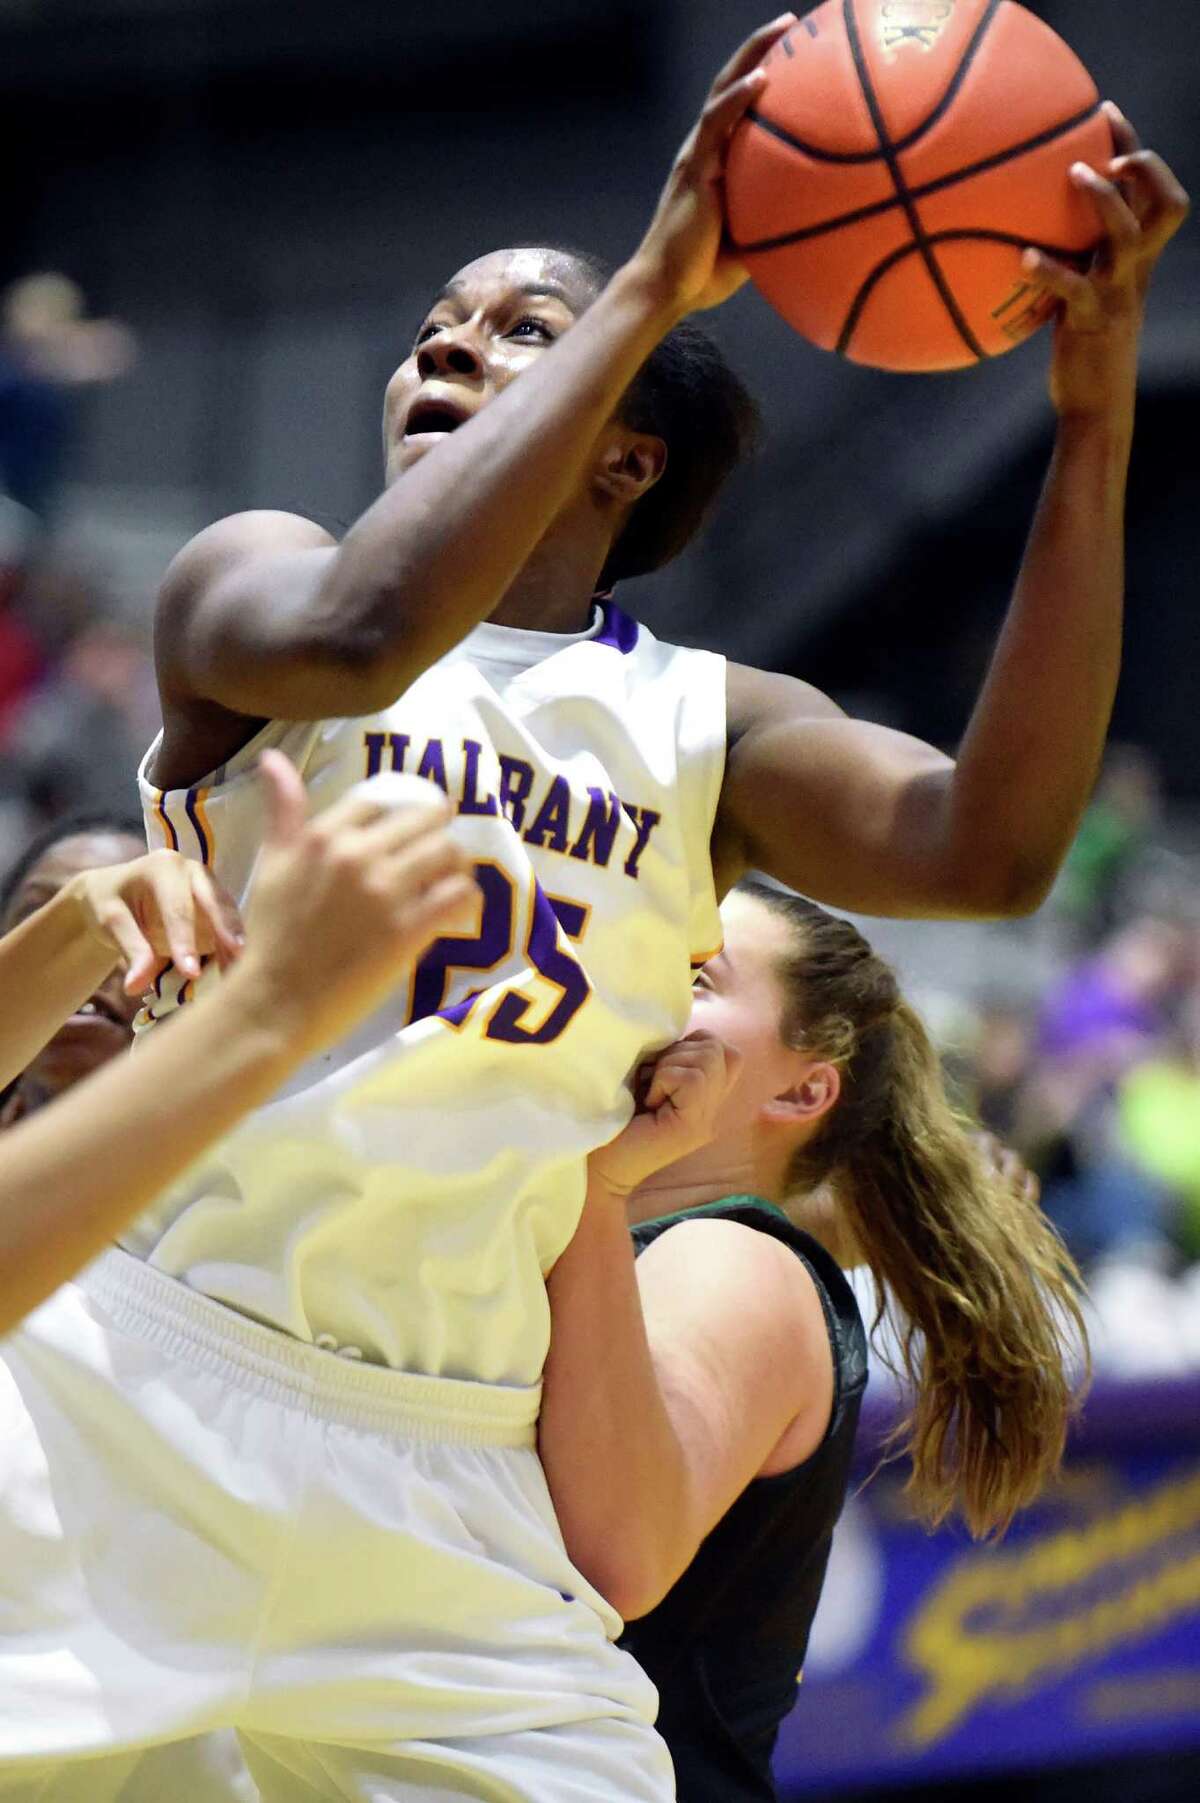 UAlbany's Shereesha Richards looks to the hoop during their basketball game against Vermont on Saturday, Jan. 9, 2016, at SEFCU Arena in Albany, N.Y. (Cindy Schultz / Times Union)